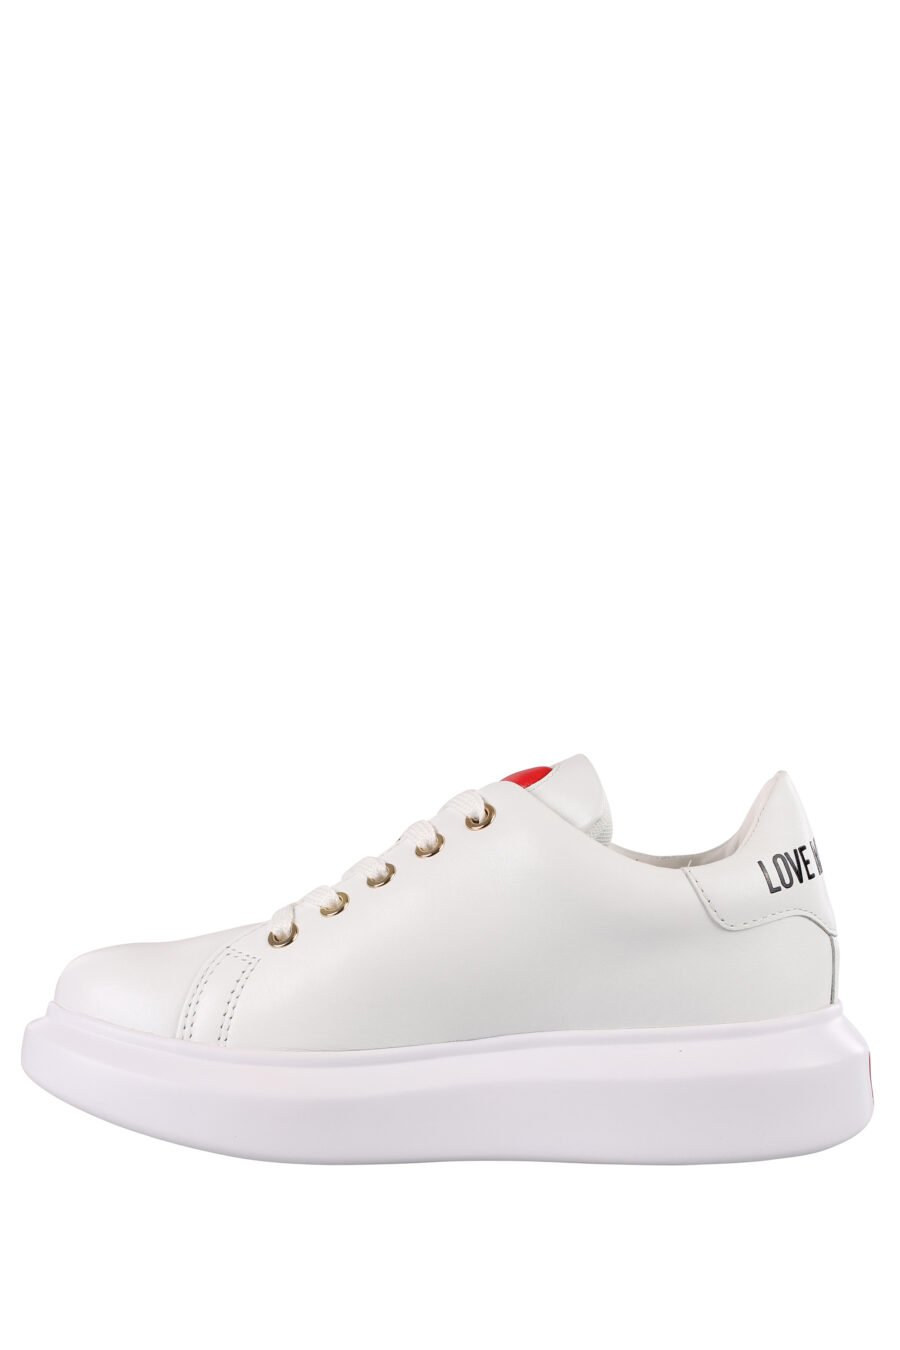 White trainers with gold metal logo and white sole - IMG 1205